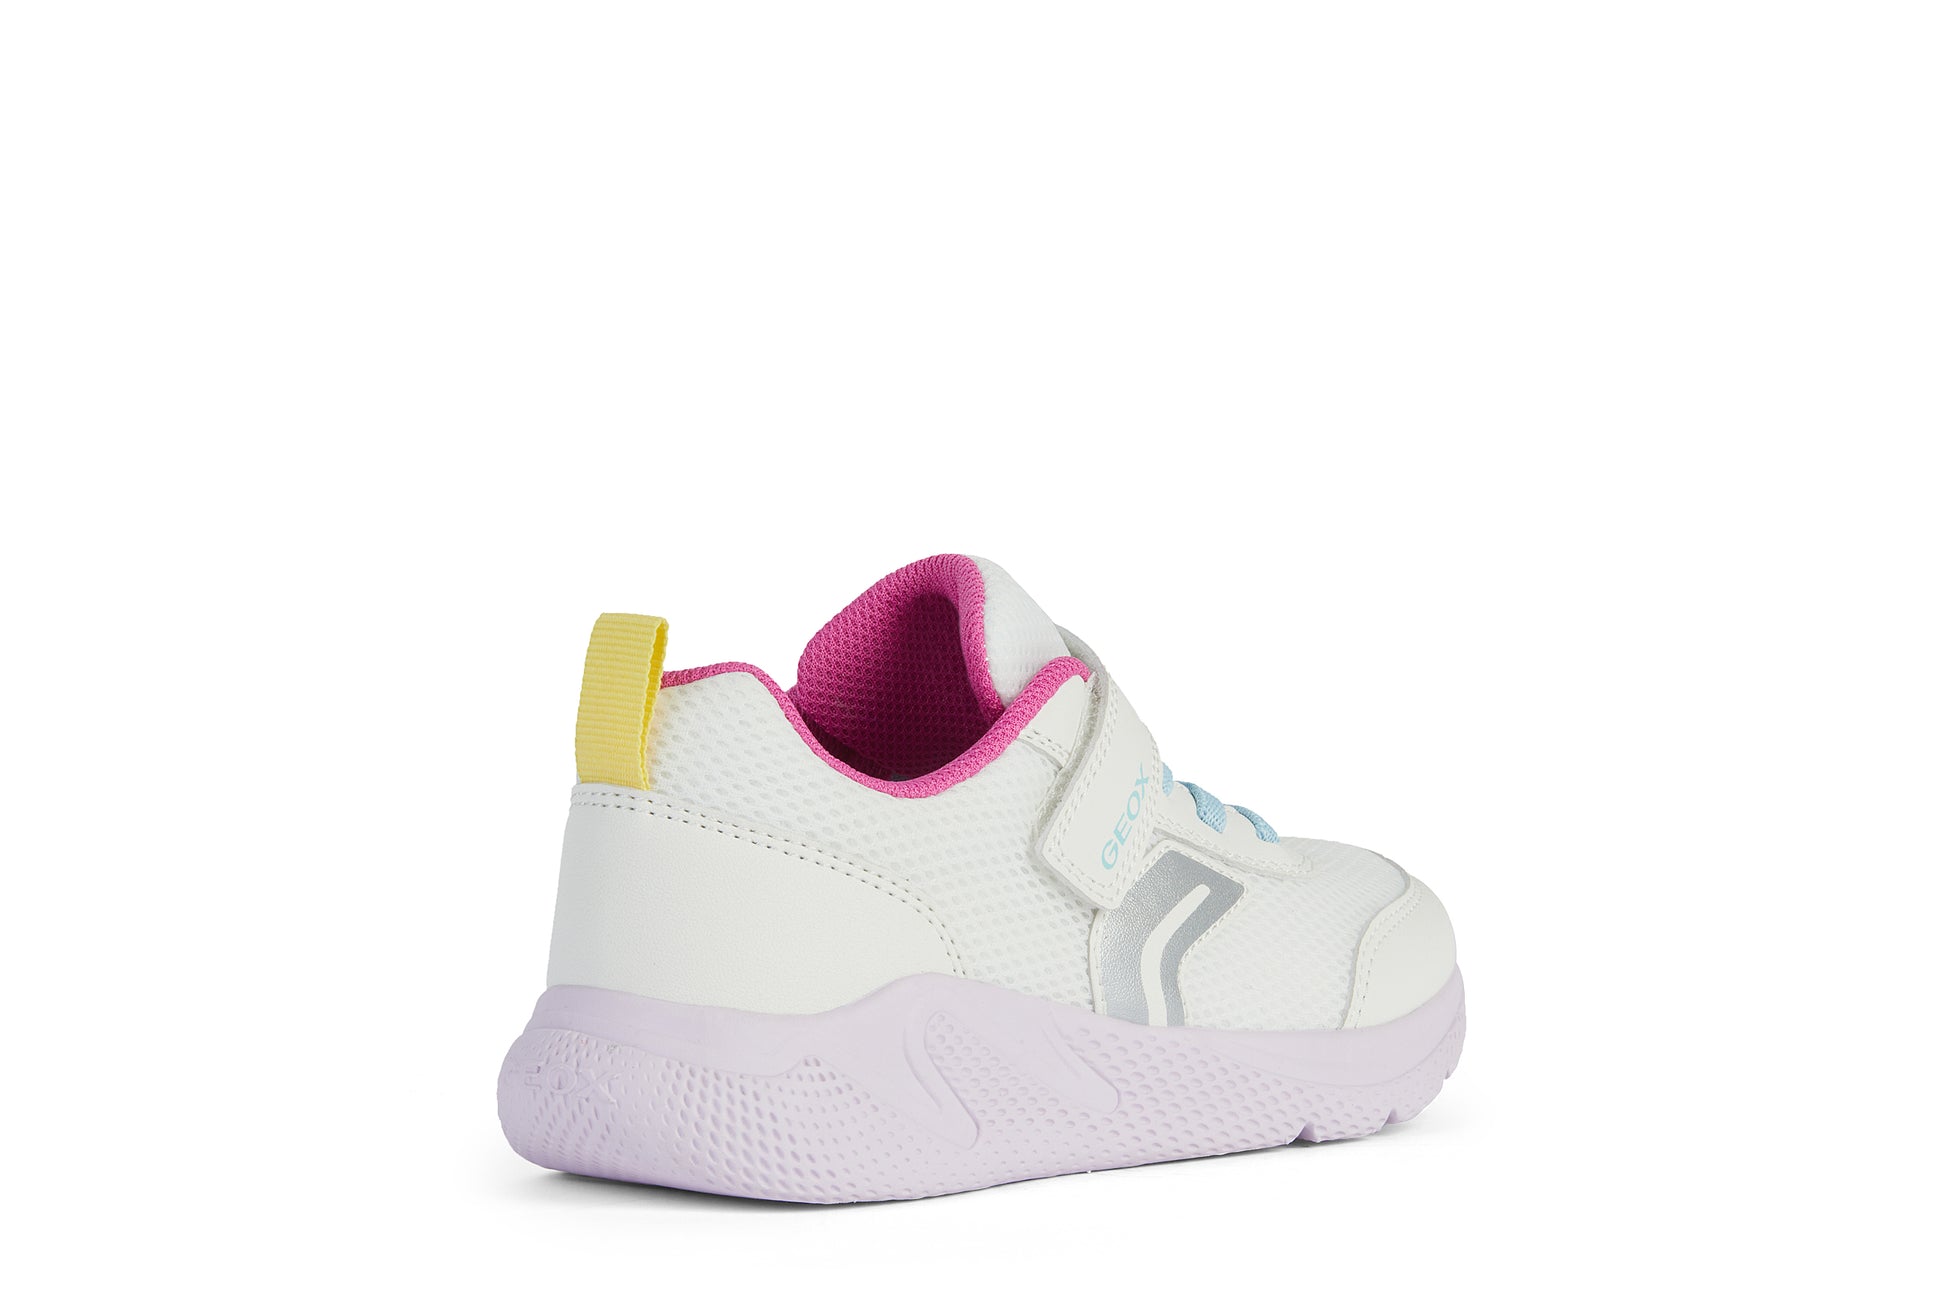 A girls trainer by Geox, style J Sprintye, in white with yellow and pink trim and velcro and blue bungee lace fastening. Angled view of right side.